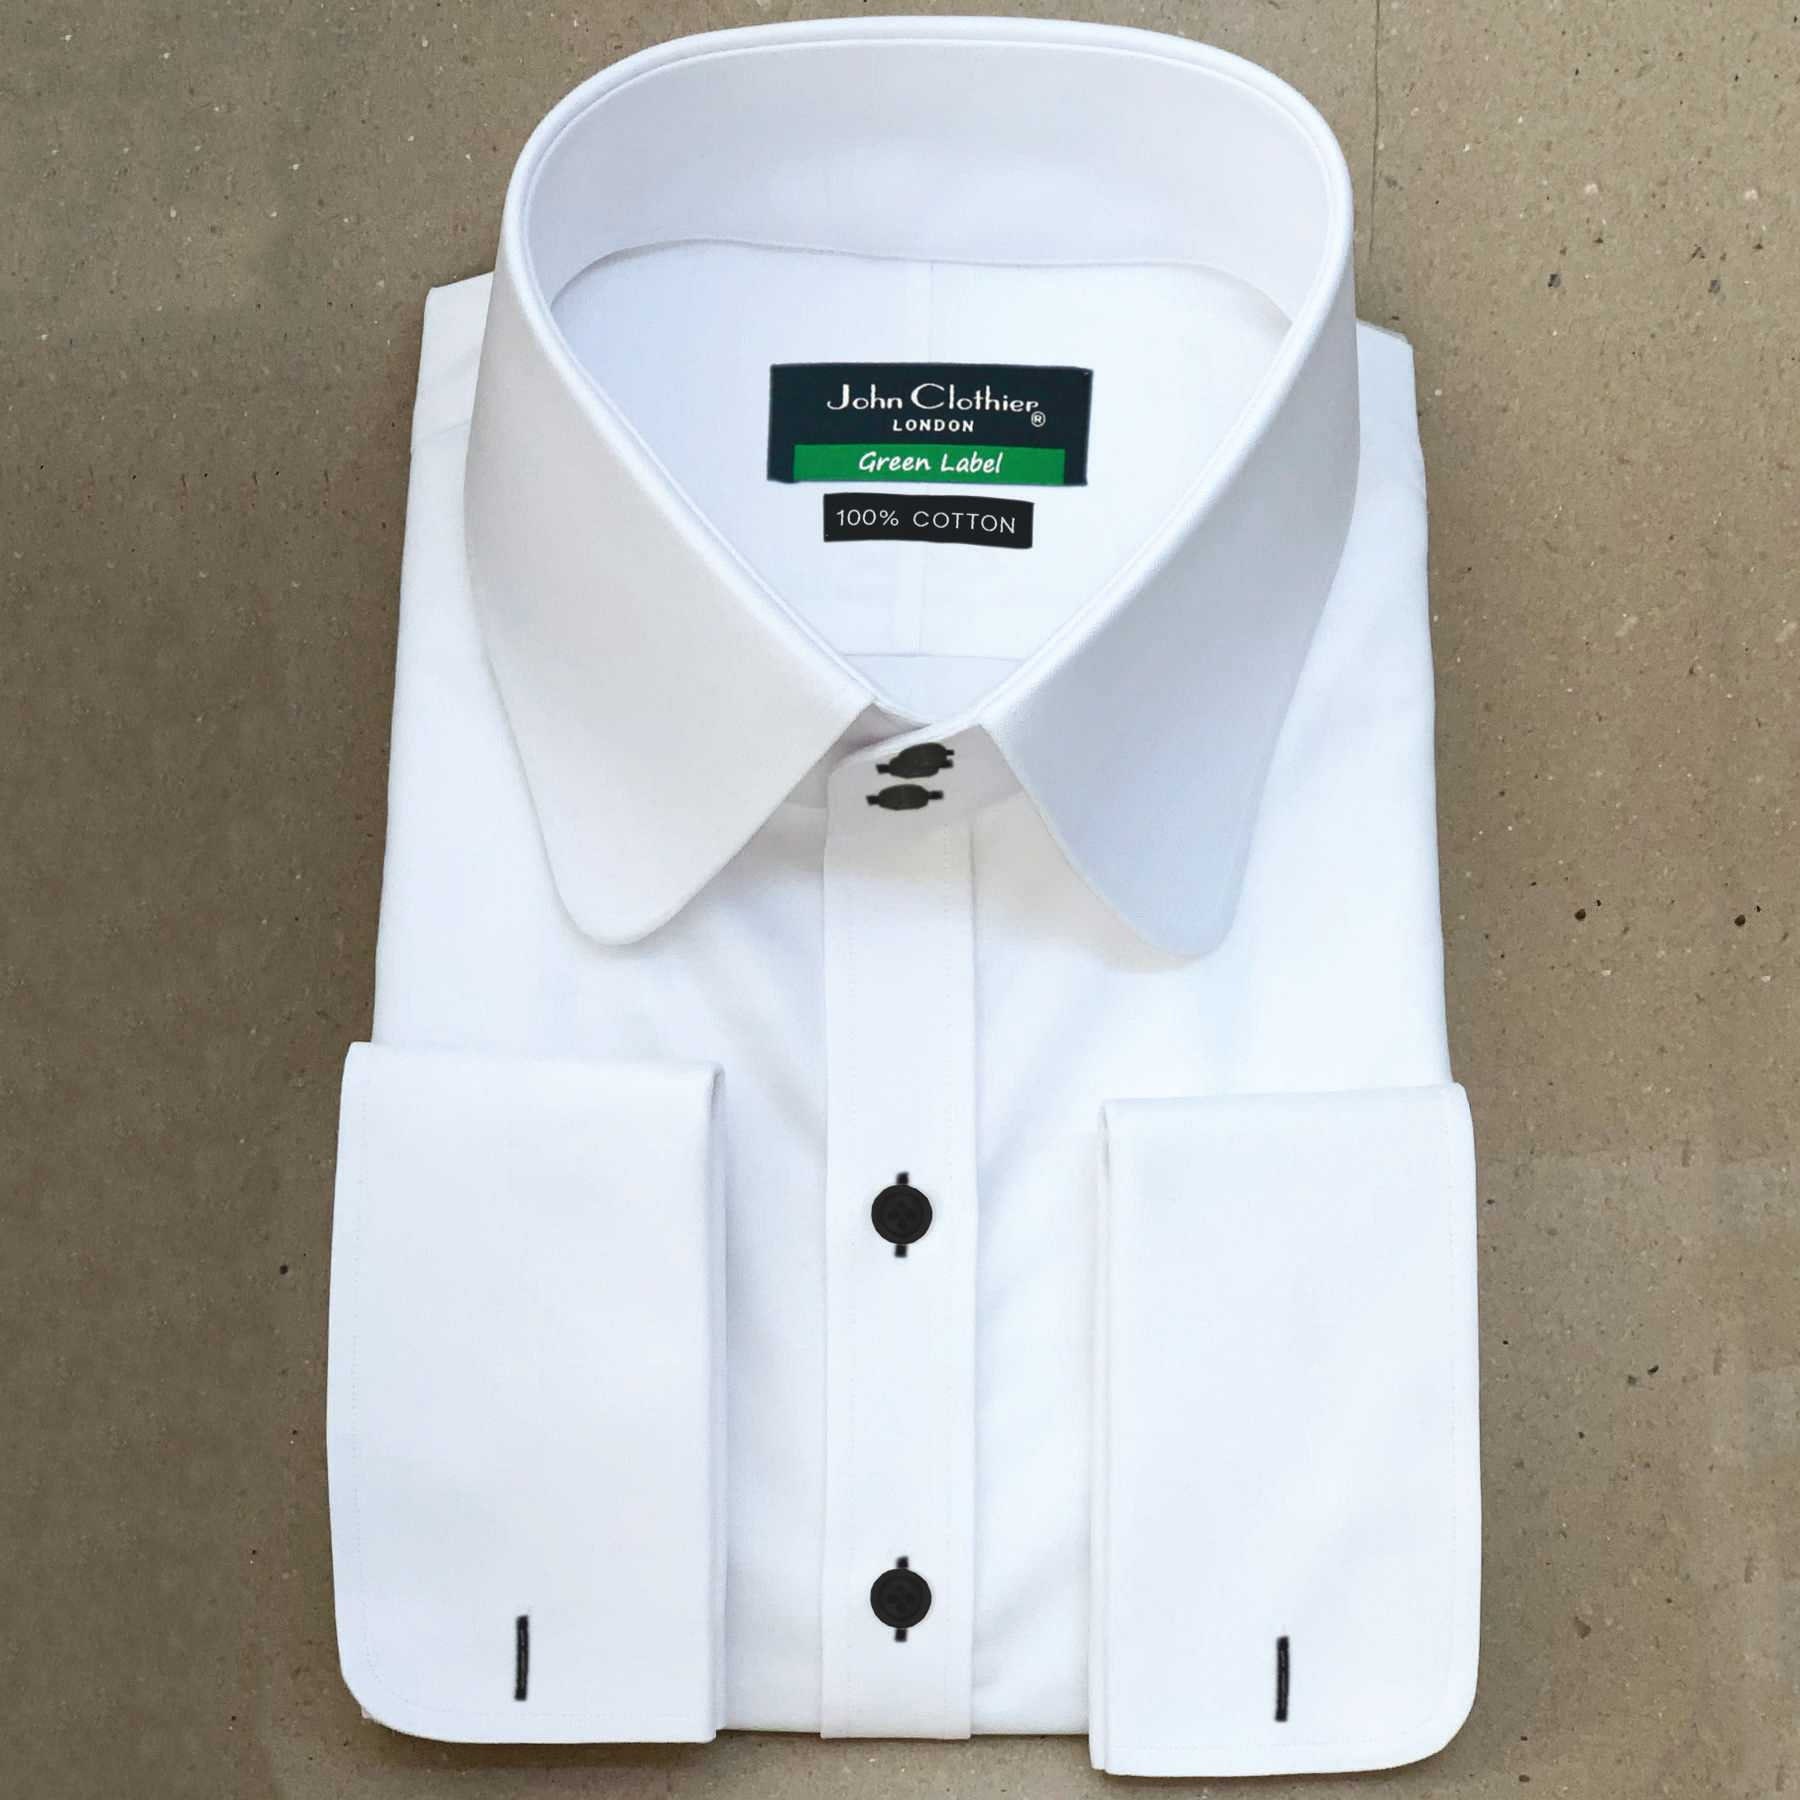 High Collar Shirt Penny White Contrast Buttons 3 Button 100% - Etsy